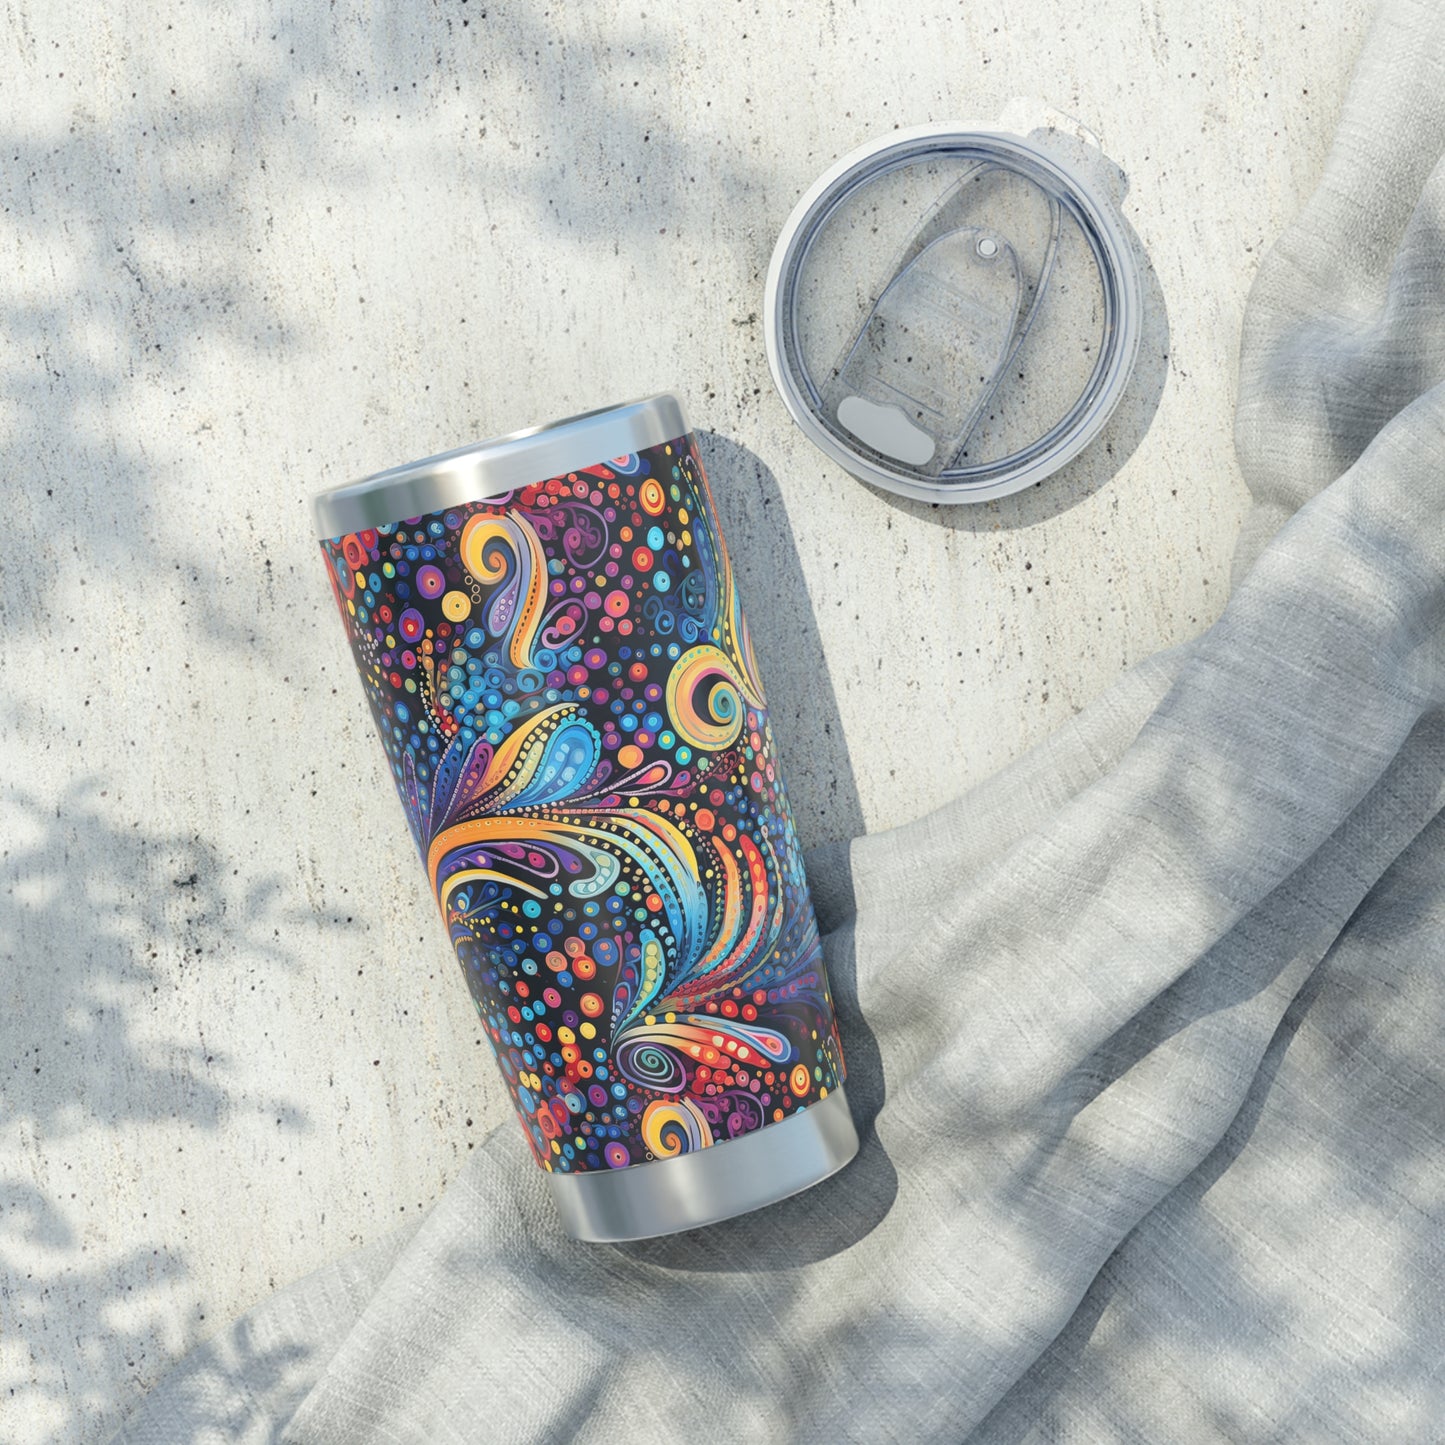 Colorful Psychedelic Swirls 1.3 - Vagabond 20oz Tumbler - Stainless Steel - Double Wall